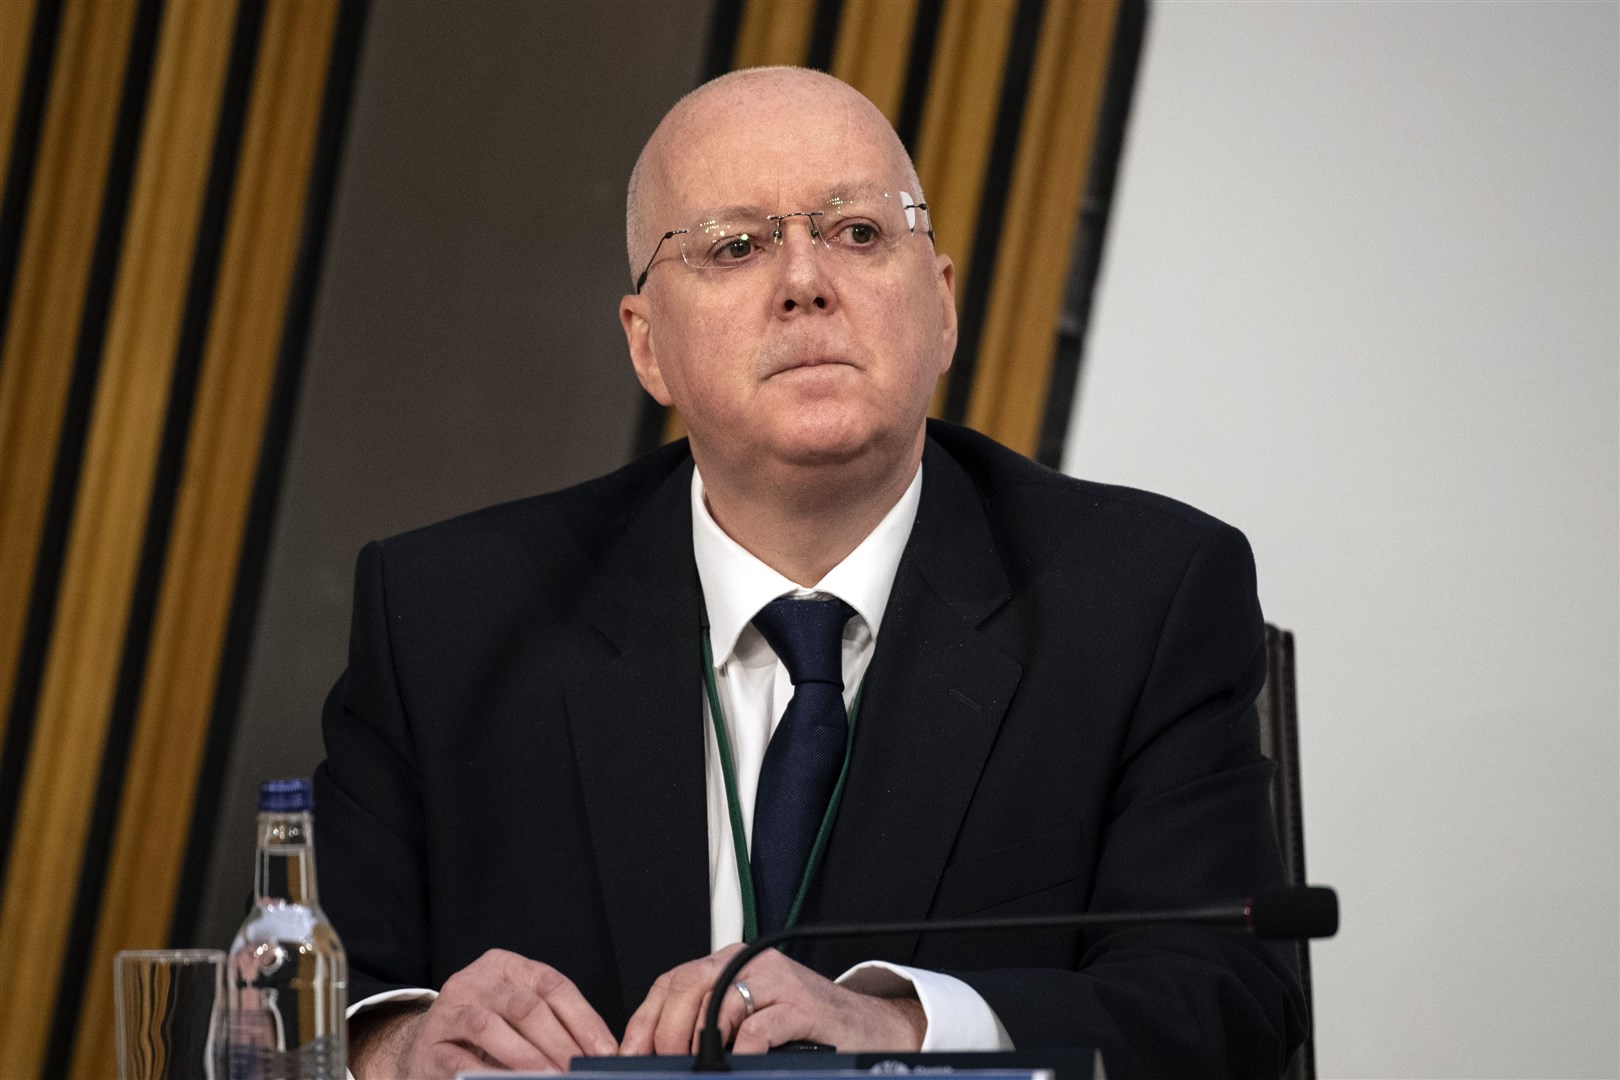 Peter Murrell stood down as the party’s chief executive amid a row over membership numbers (Andy Buchanan/PA)